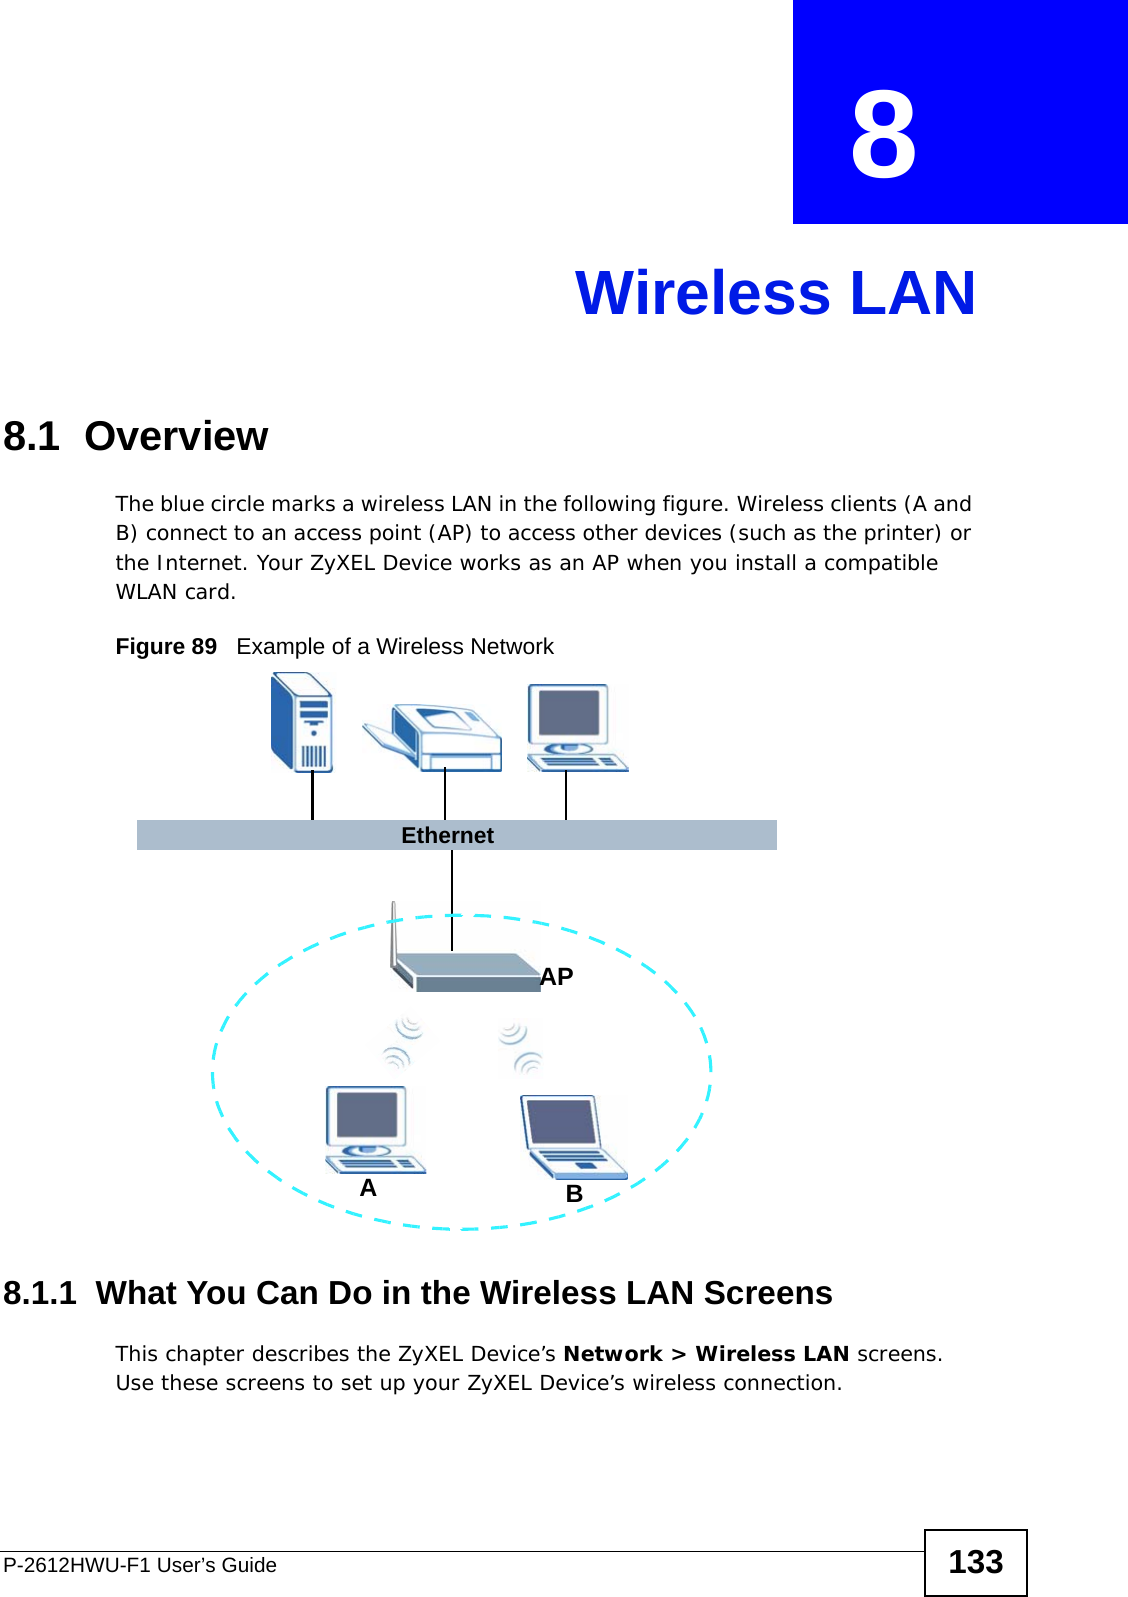 P-2612HWU-F1 User’s Guide 133CHAPTER  8 Wireless LAN8.1  Overview The blue circle marks a wireless LAN in the following figure. Wireless clients (A and B) connect to an access point (AP) to access other devices (such as the printer) or the Internet. Your ZyXEL Device works as an AP when you install a compatible WLAN card.Figure 89   Example of a Wireless Network8.1.1  What You Can Do in the Wireless LAN ScreensThis chapter describes the ZyXEL Device’s Network &gt; Wireless LAN screens. Use these screens to set up your ZyXEL Device’s wireless connection.ABAPEthernet